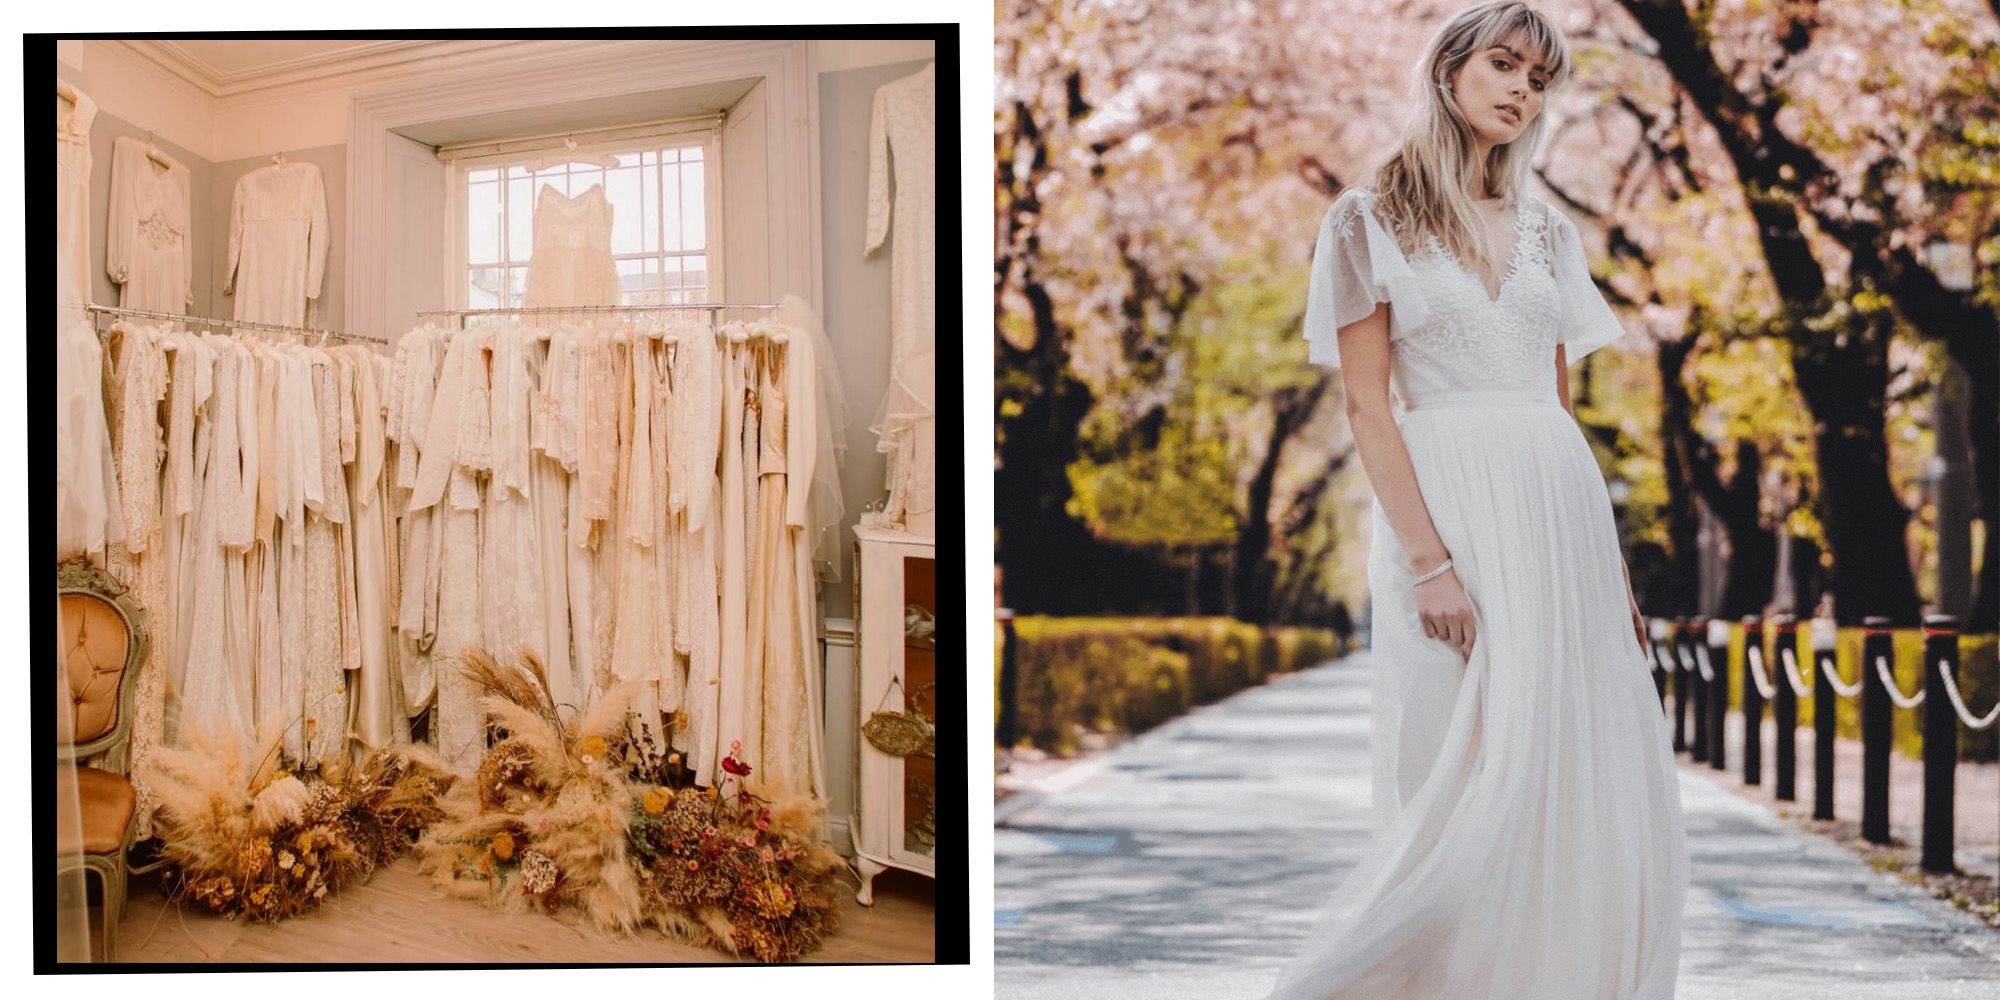 Here's Where You Can Buy (and Sell!) Gently Used, but Oh-So Stylish Wedding  Gowns and More - Washingtonian